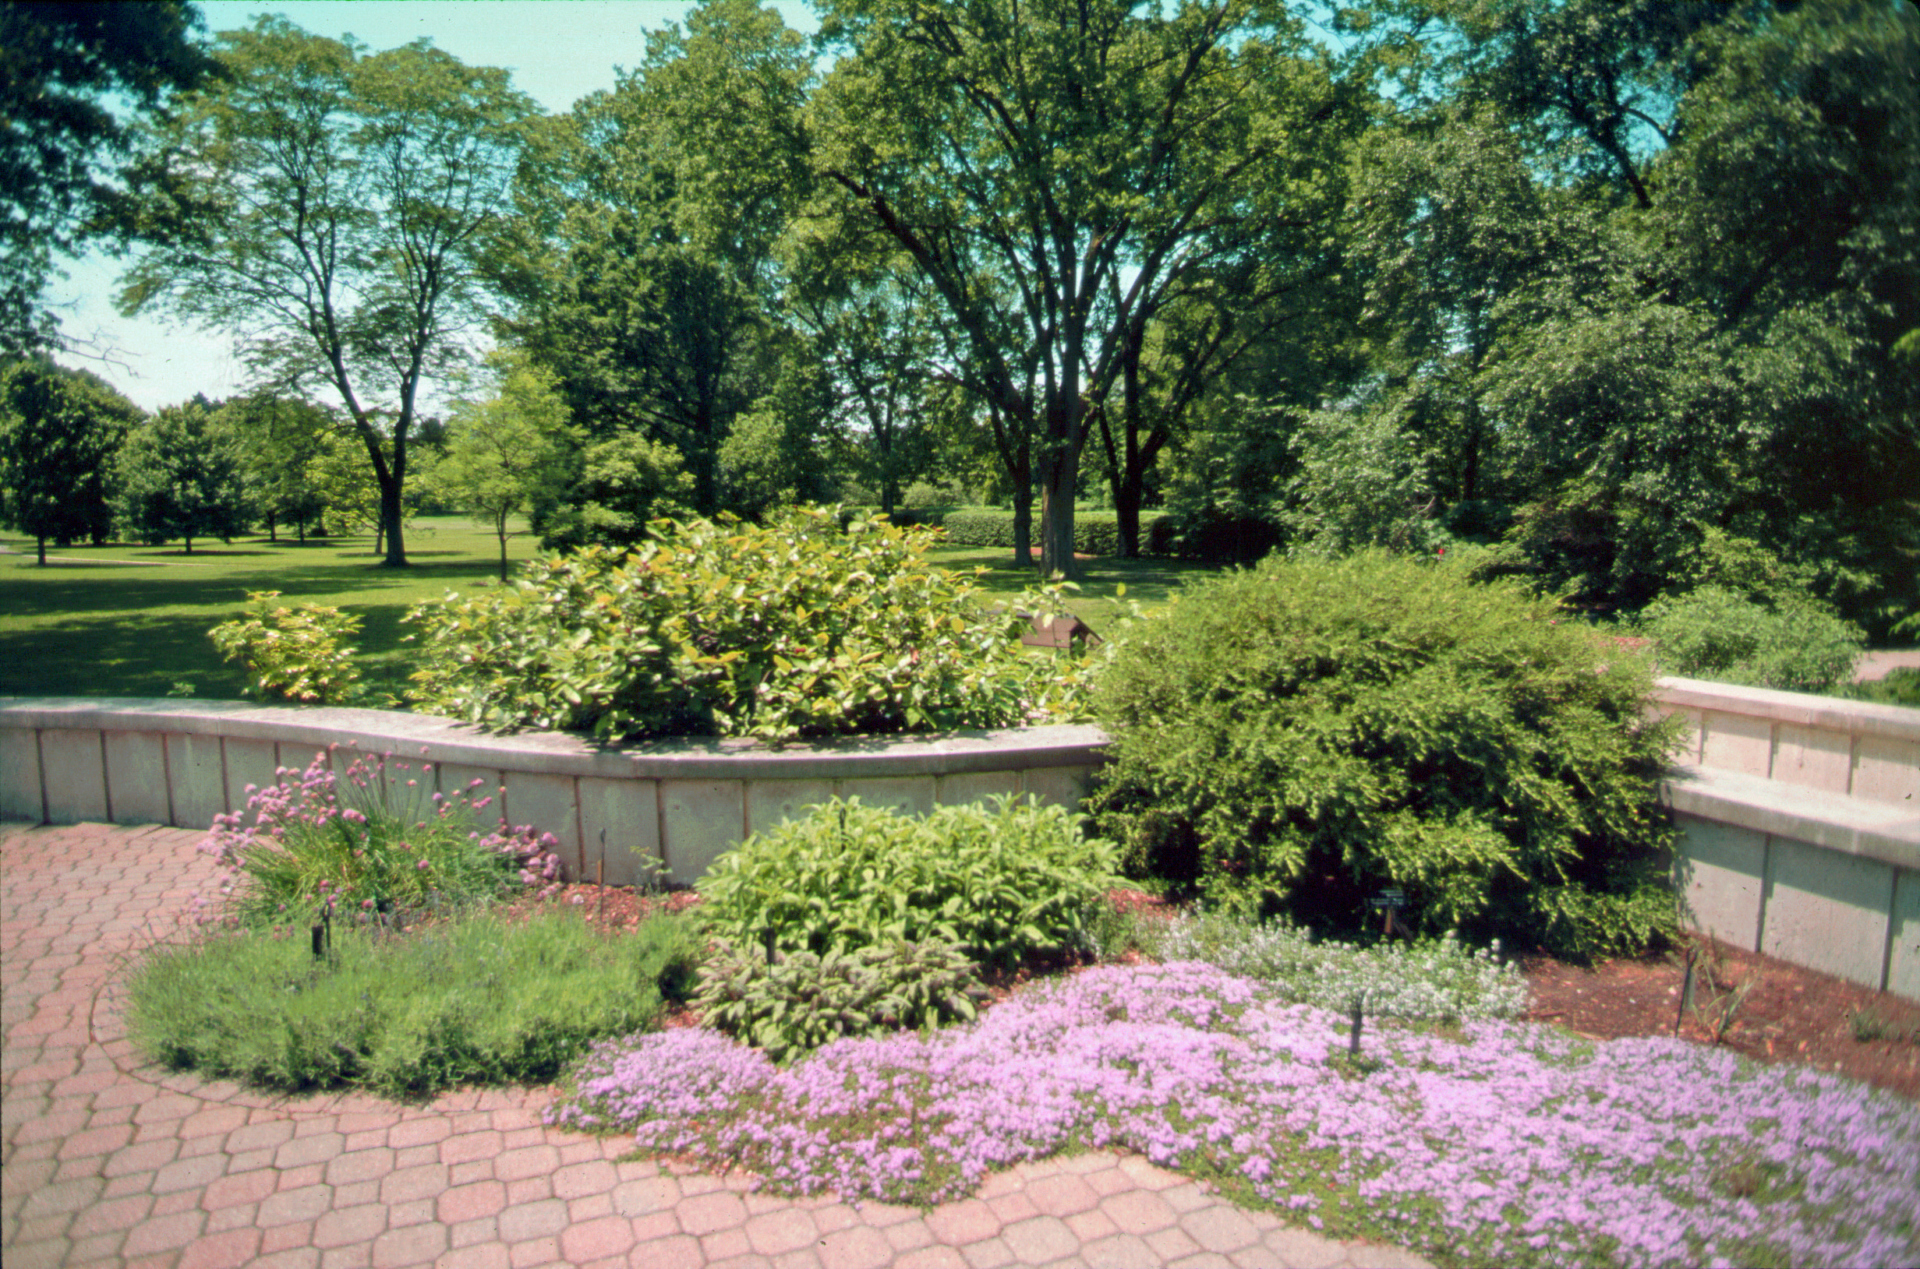 A small herb garden surrounded by pavers with trees in the background.